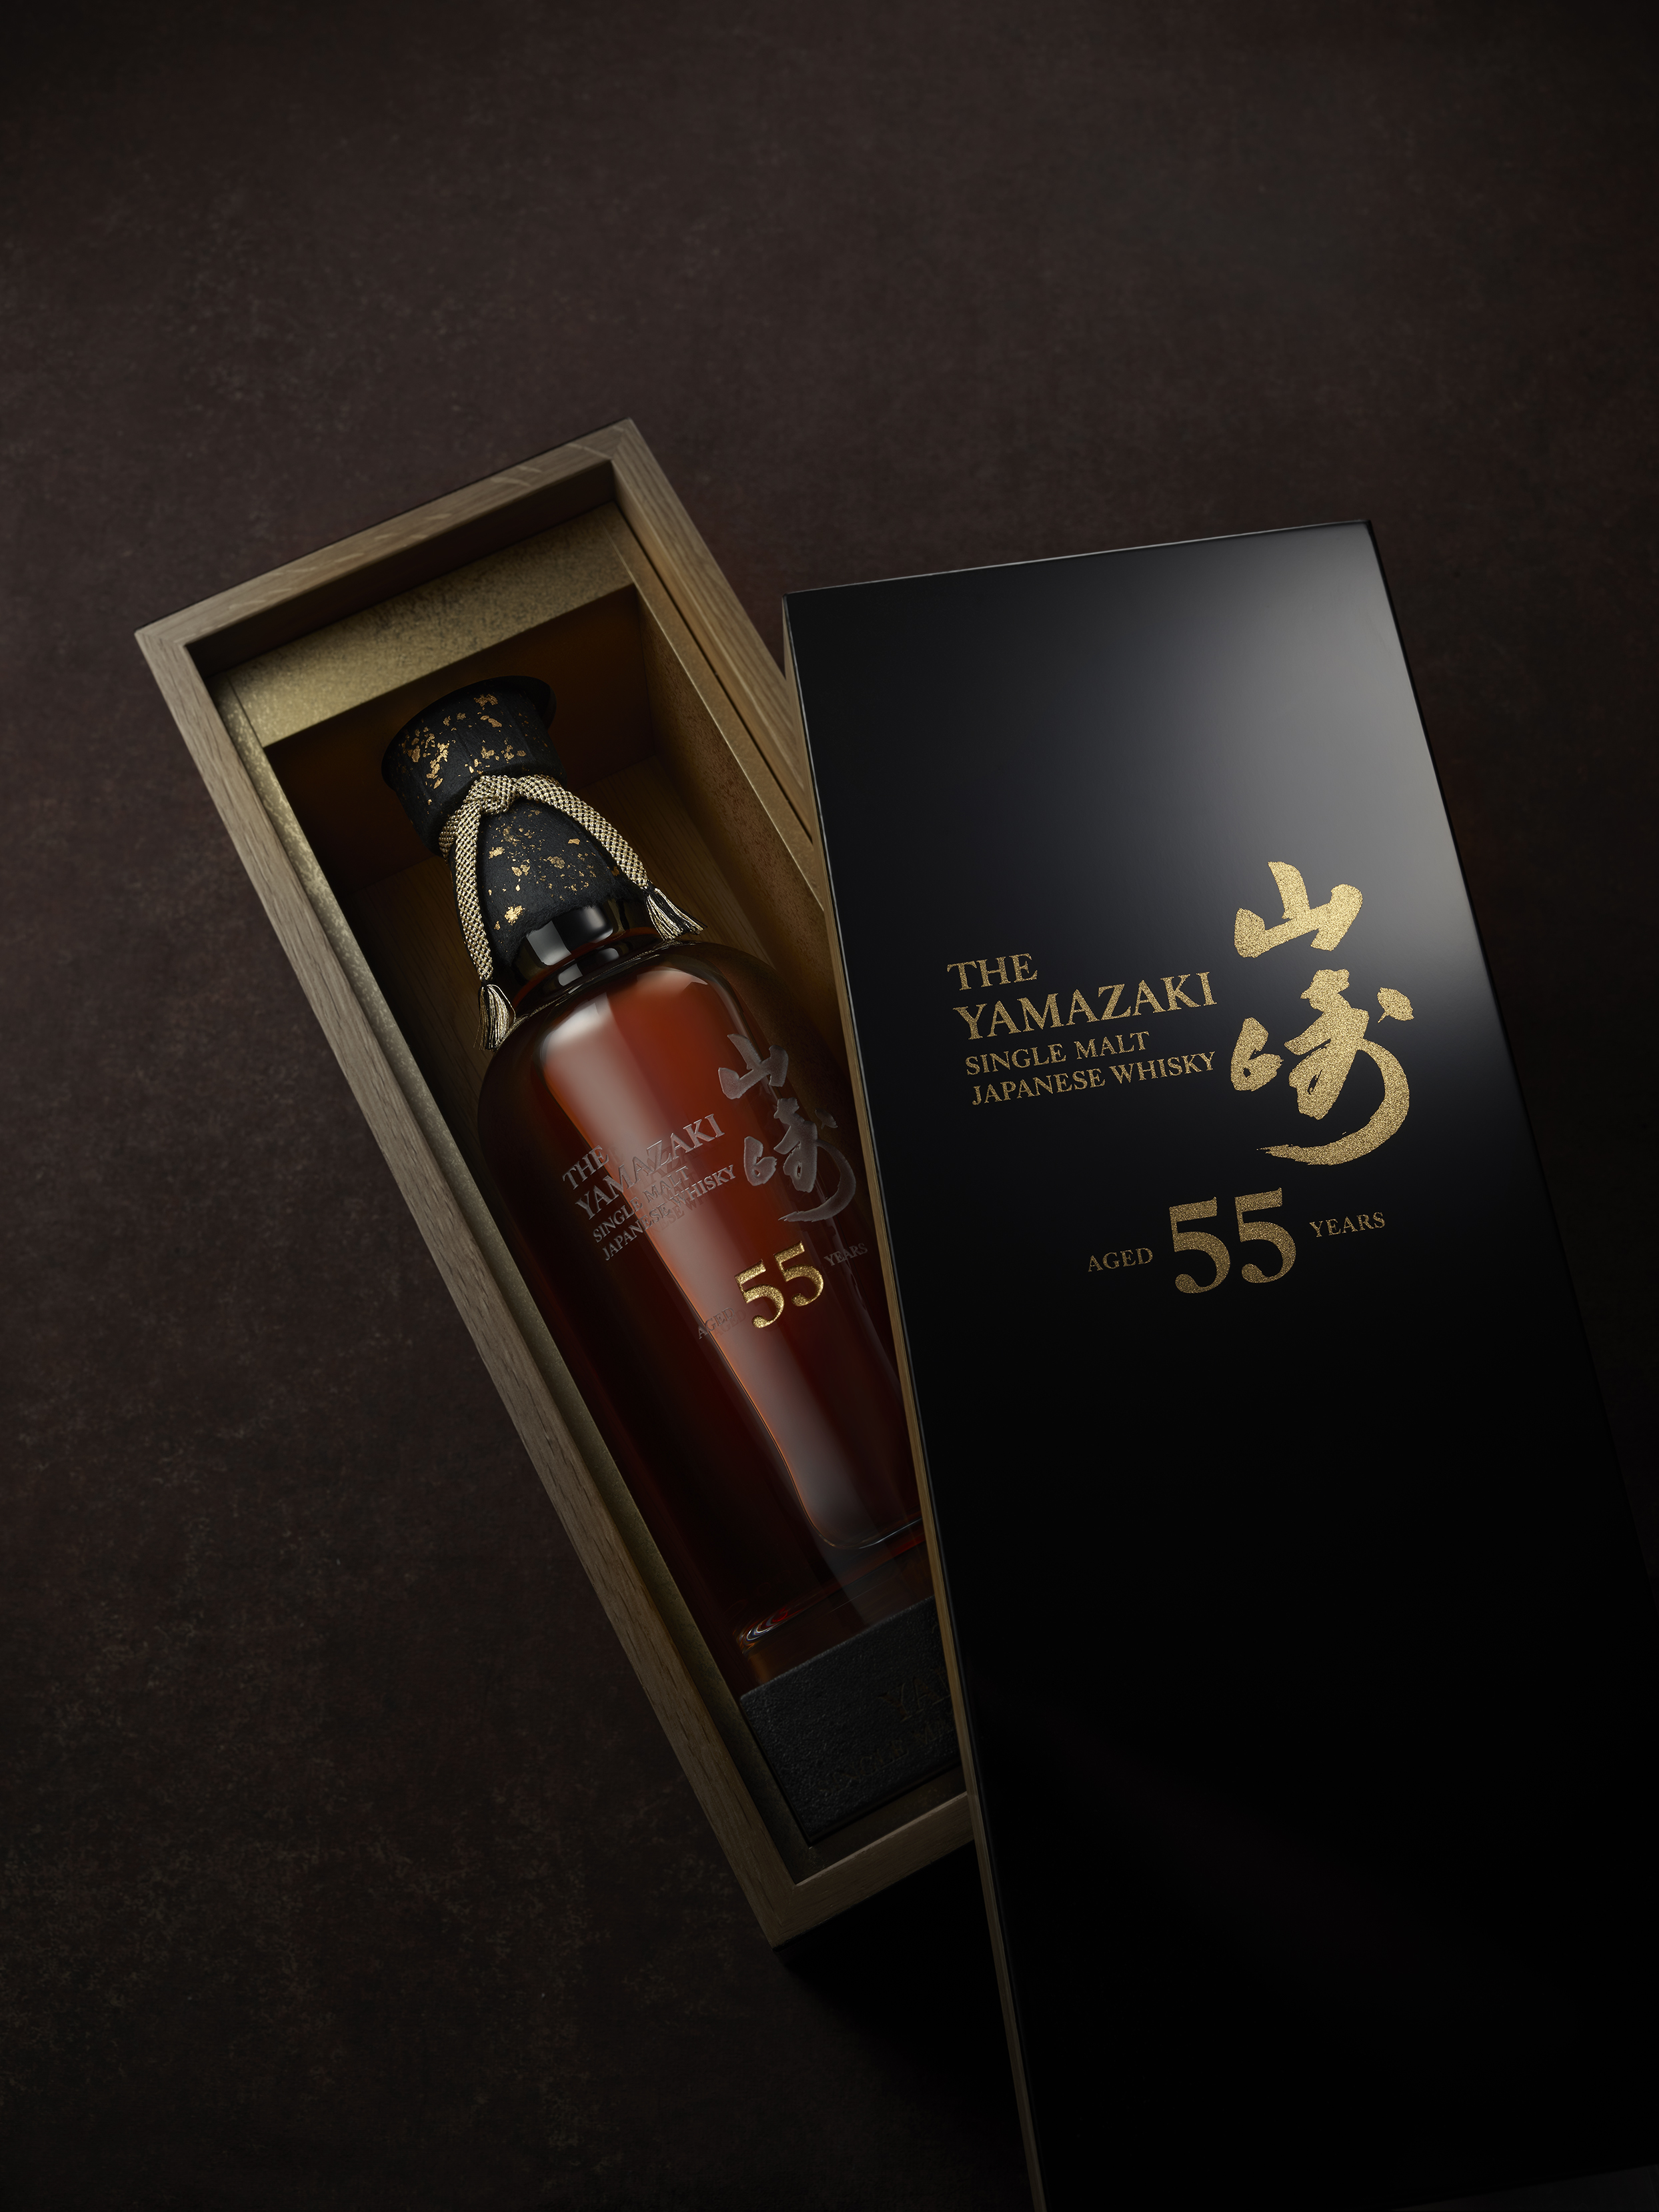 One of the world's most exclusive whisky`s